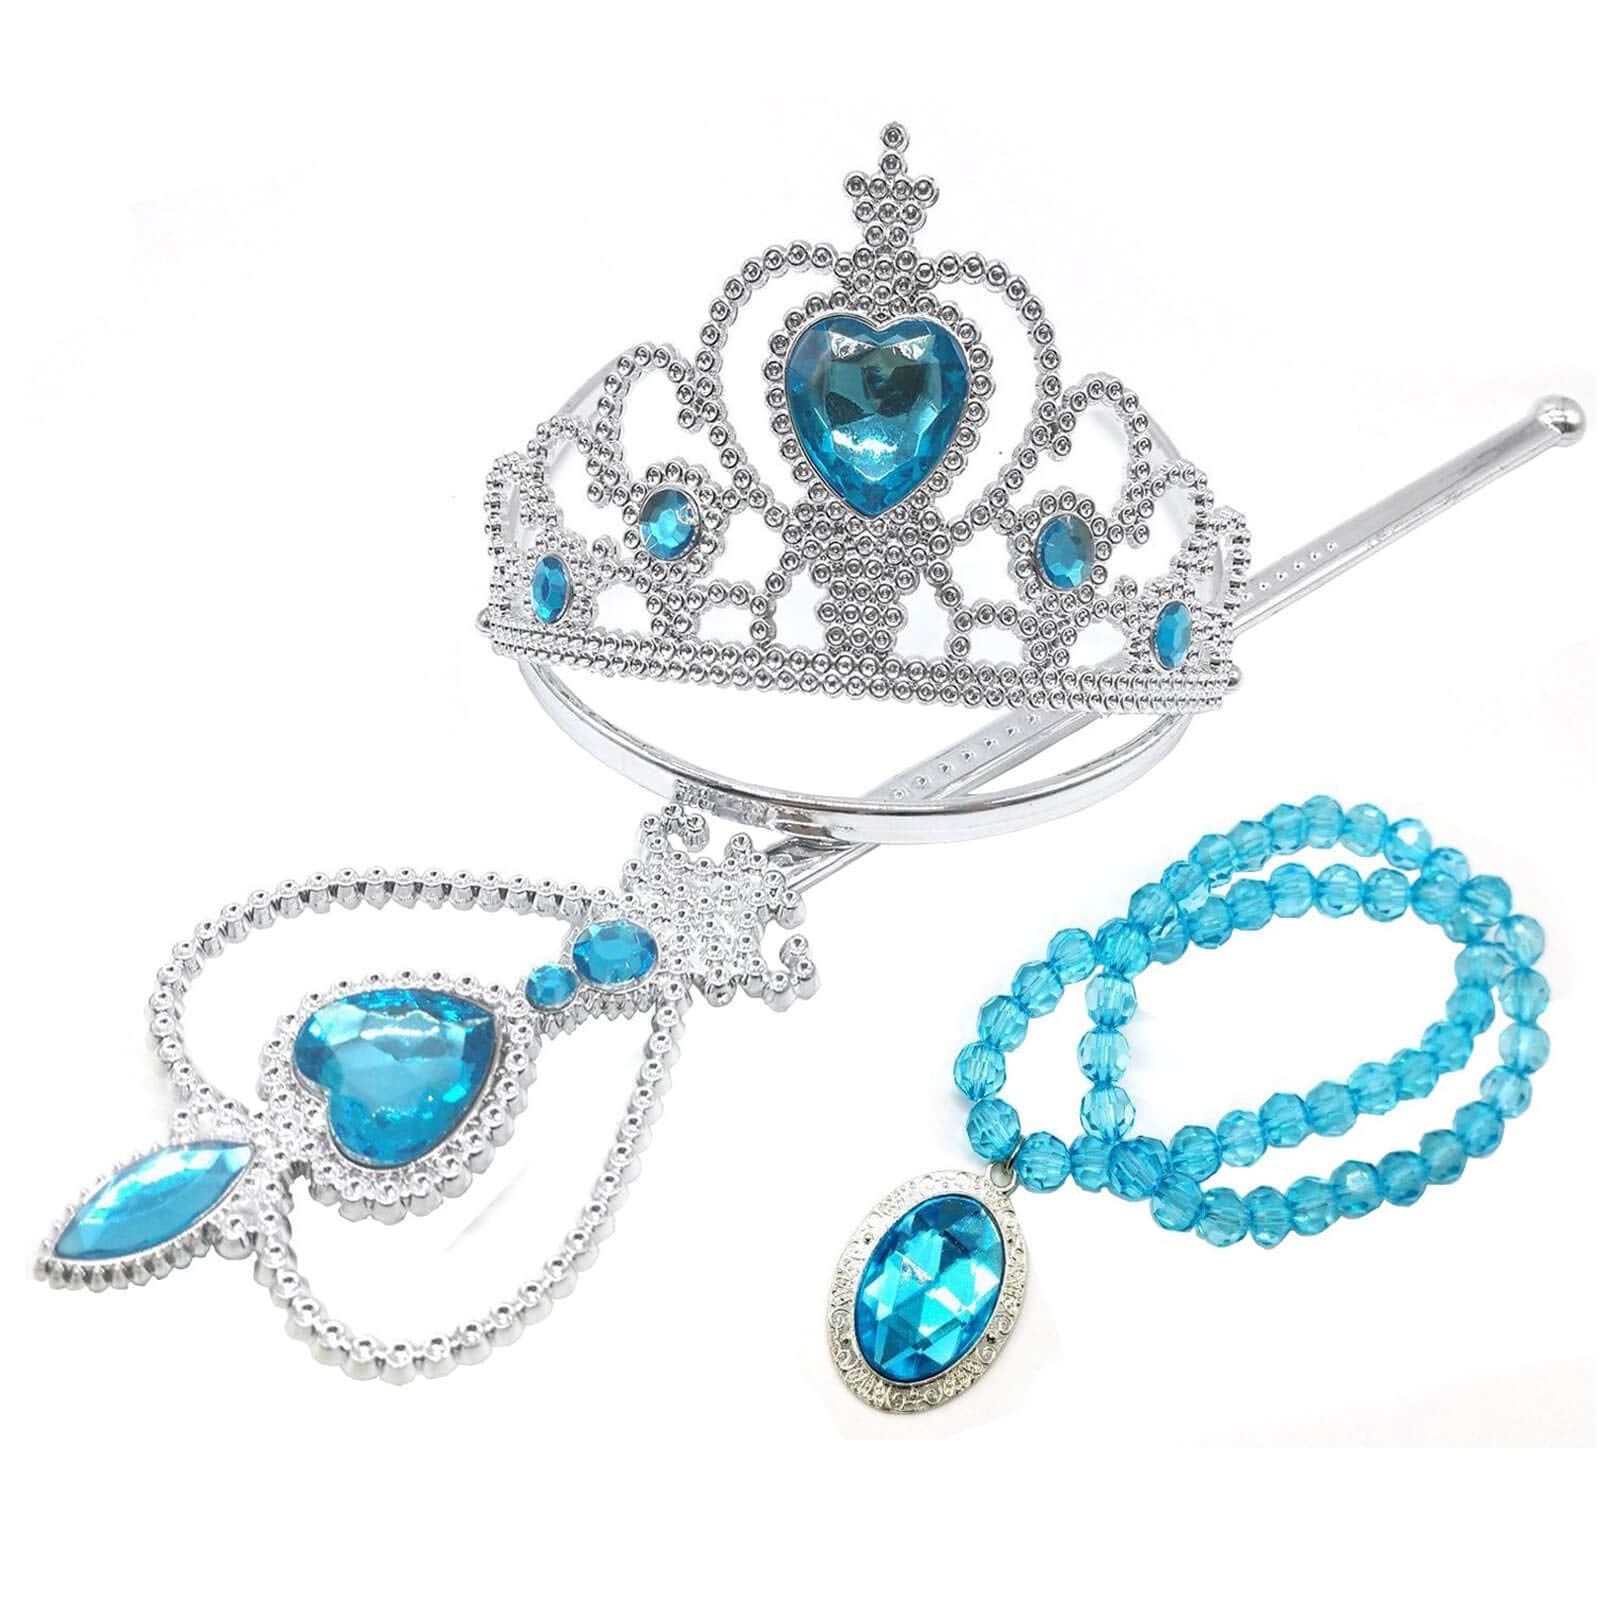 Orgrimmar Princess Dress Up Accessories Gloves Tiara Crown Wand Necklaces Presents for Kids Girls